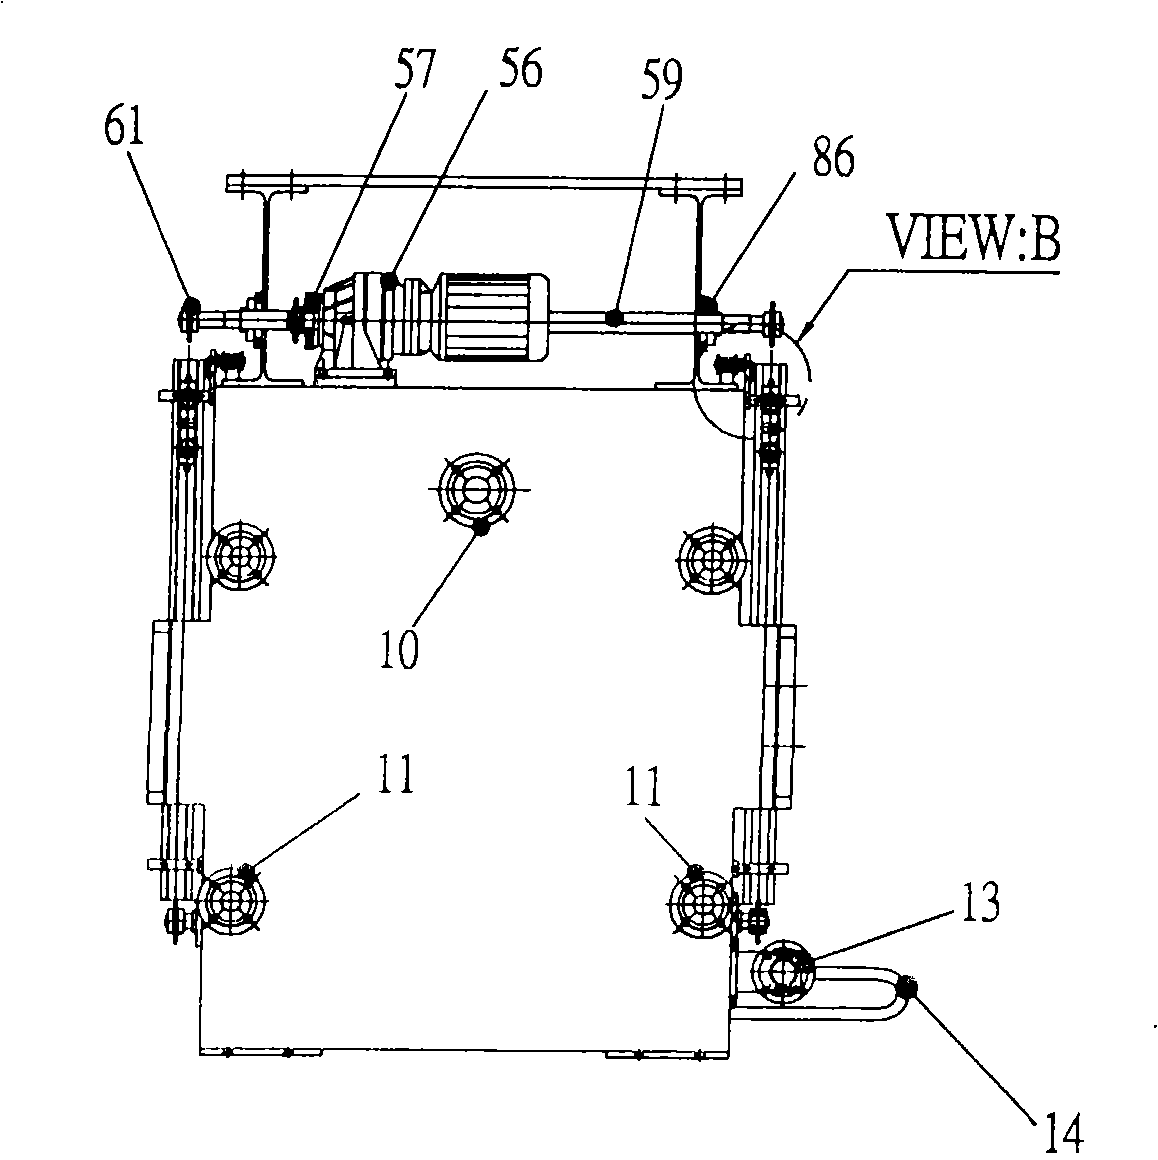 Device and method of filter press for quickly discharging material and cleaning filter cloth